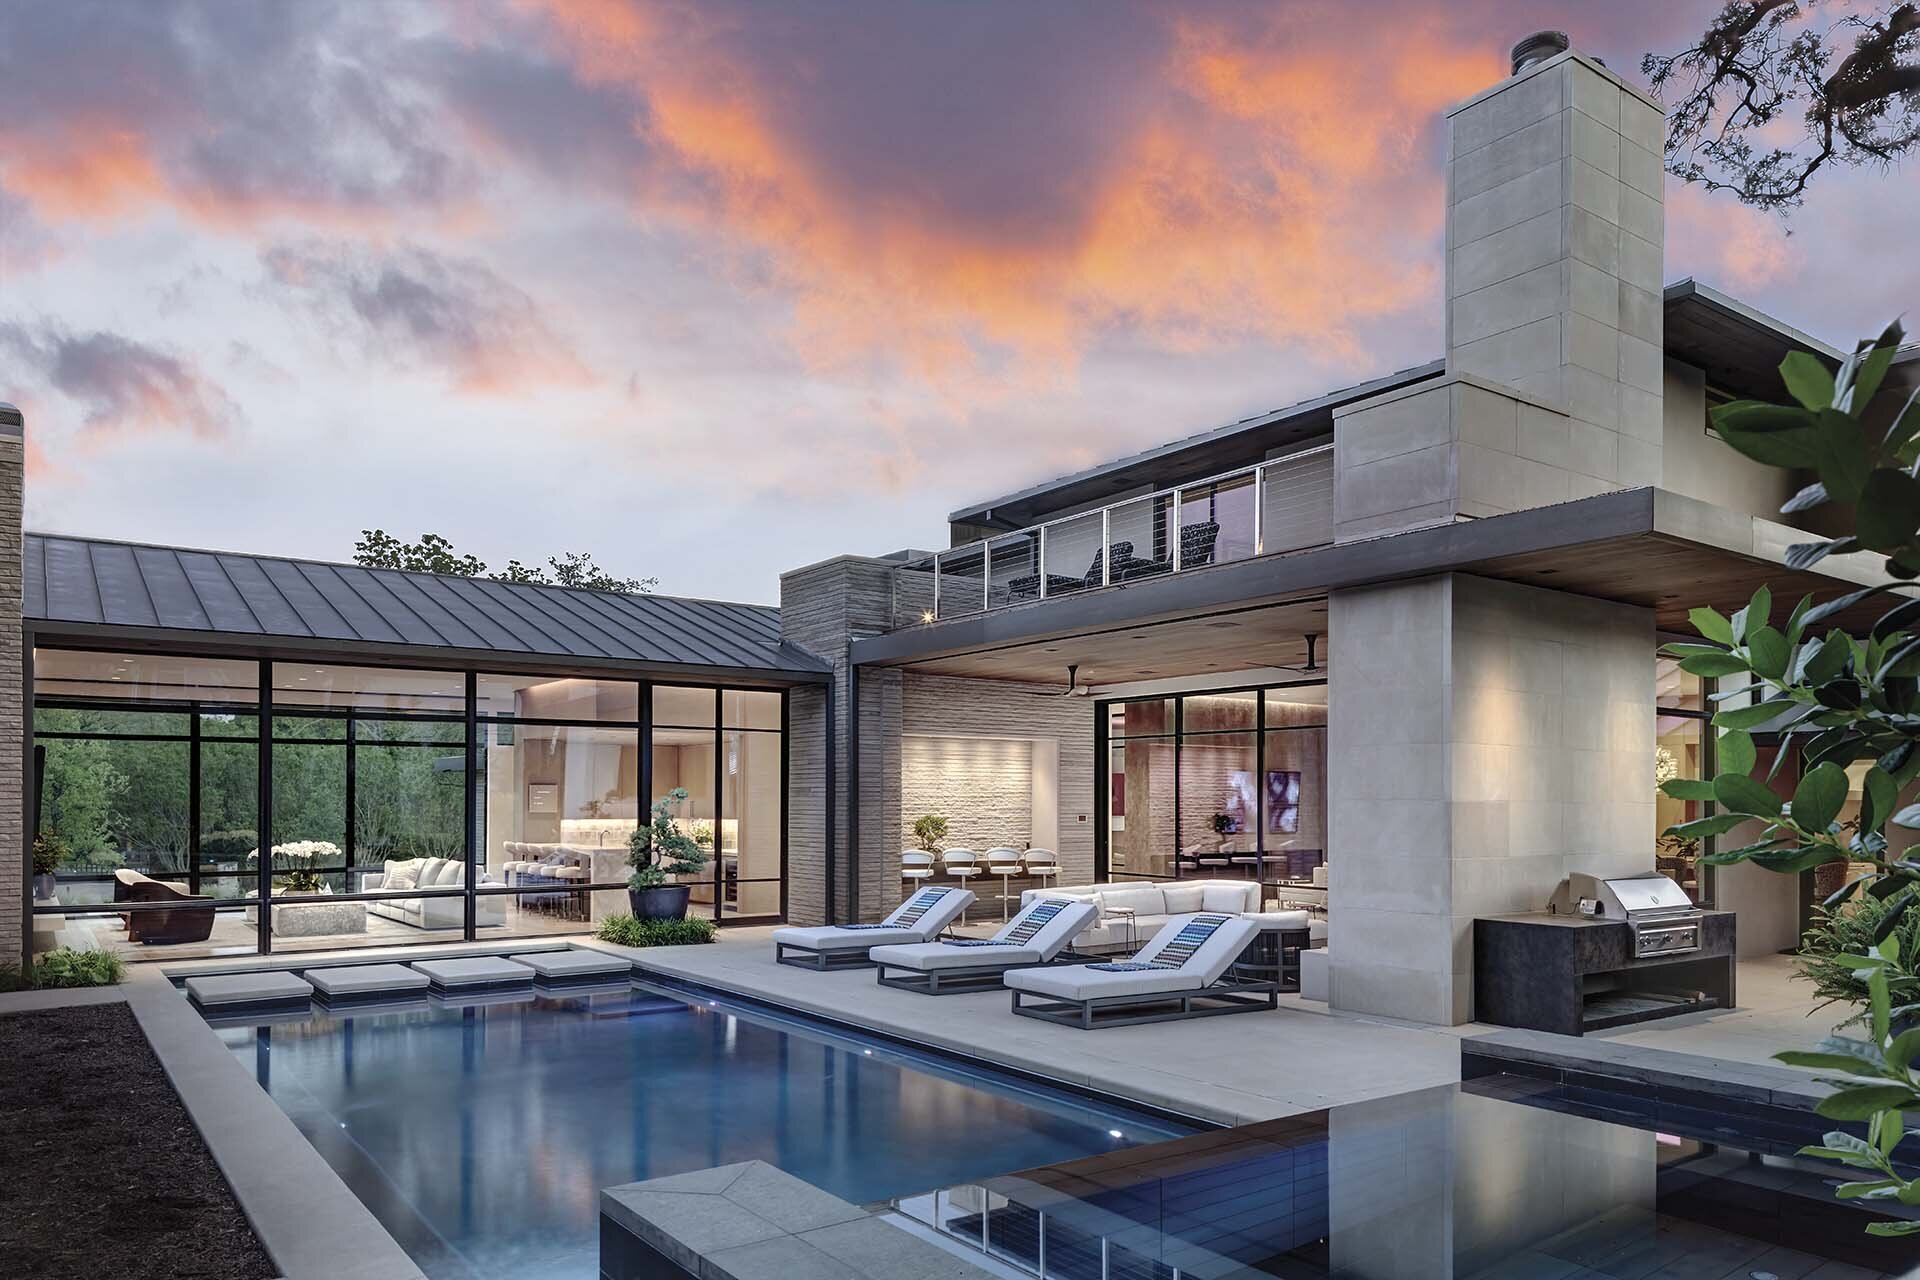  Modern comfortable contemporary home in Preston Hollow Dallas Texas featuring a fluid connection between interior and exterior with views from pool terrace 